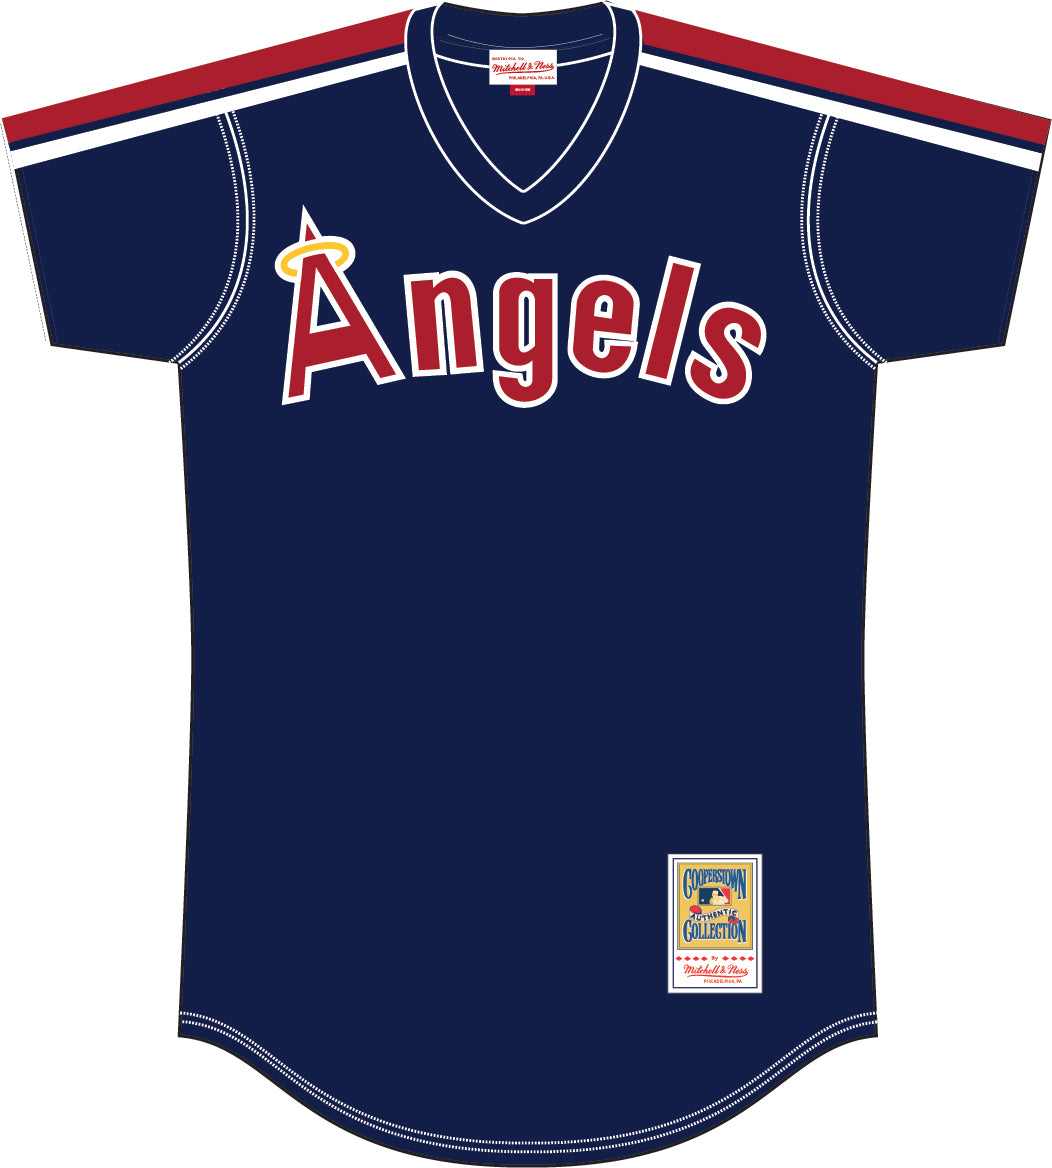 Men's Rod Carew California Angels Mitchell & Ness Cooperstown Collection Mesh Batting Practice Button-Up Jersey - Navy